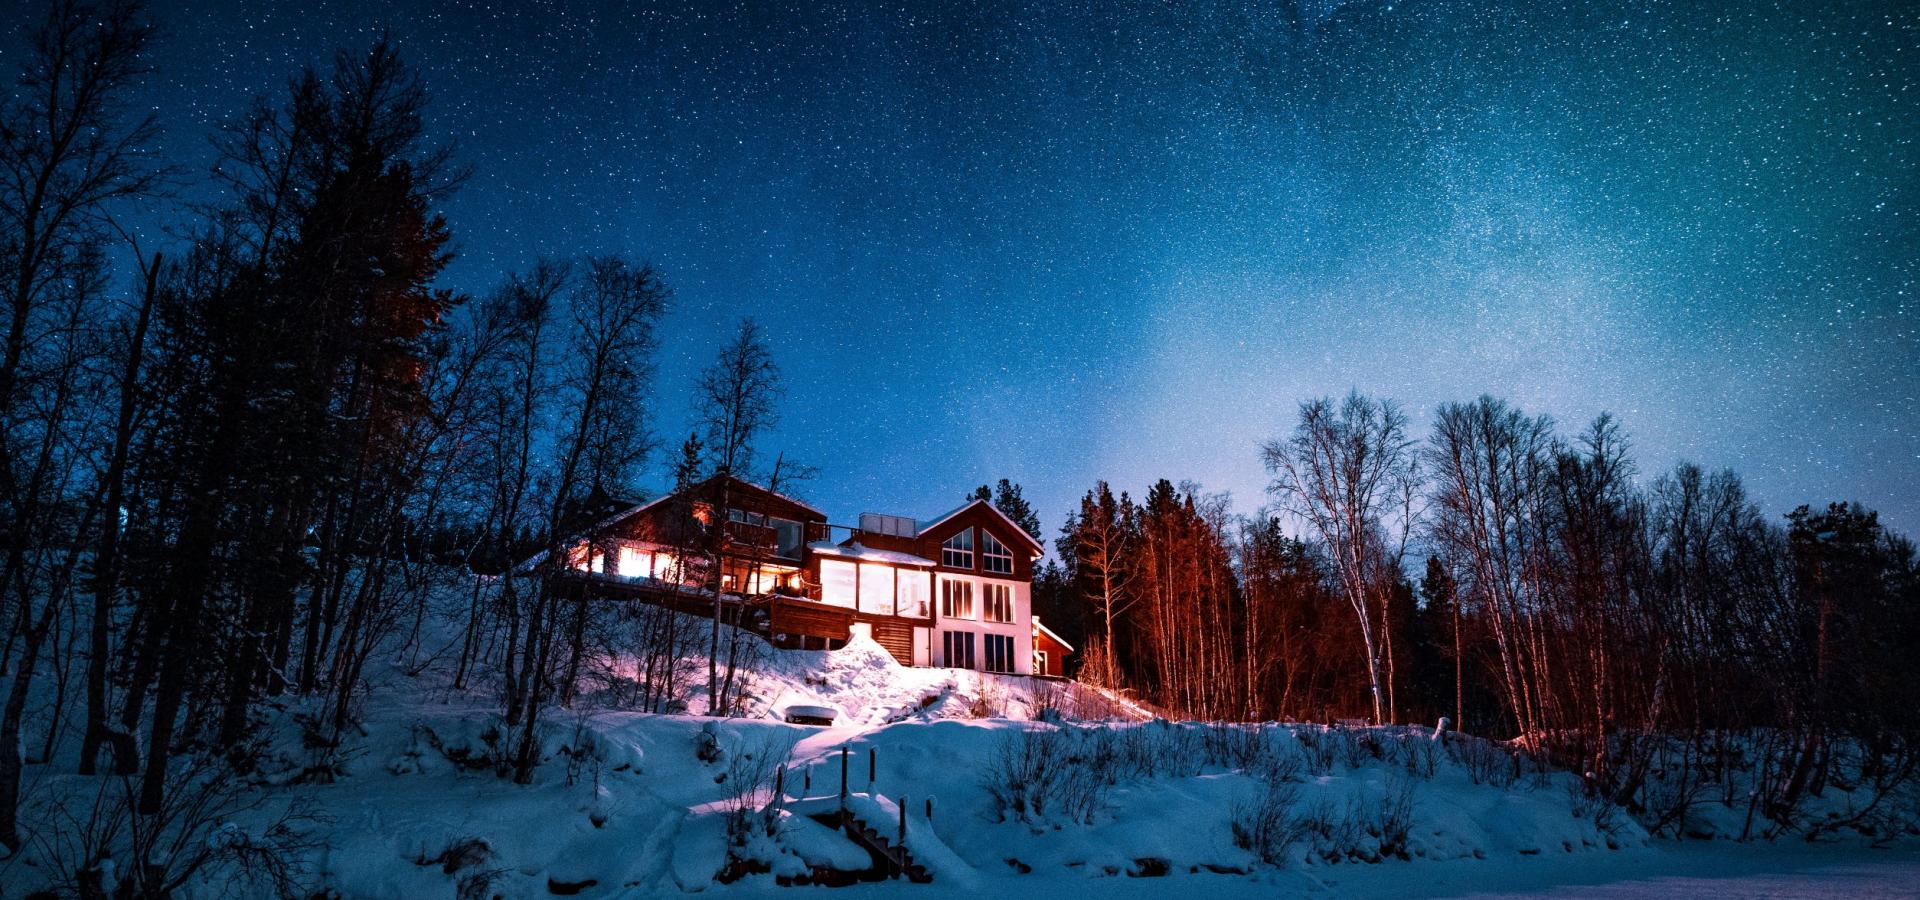 Reisa Lodge under the stars and northern lights